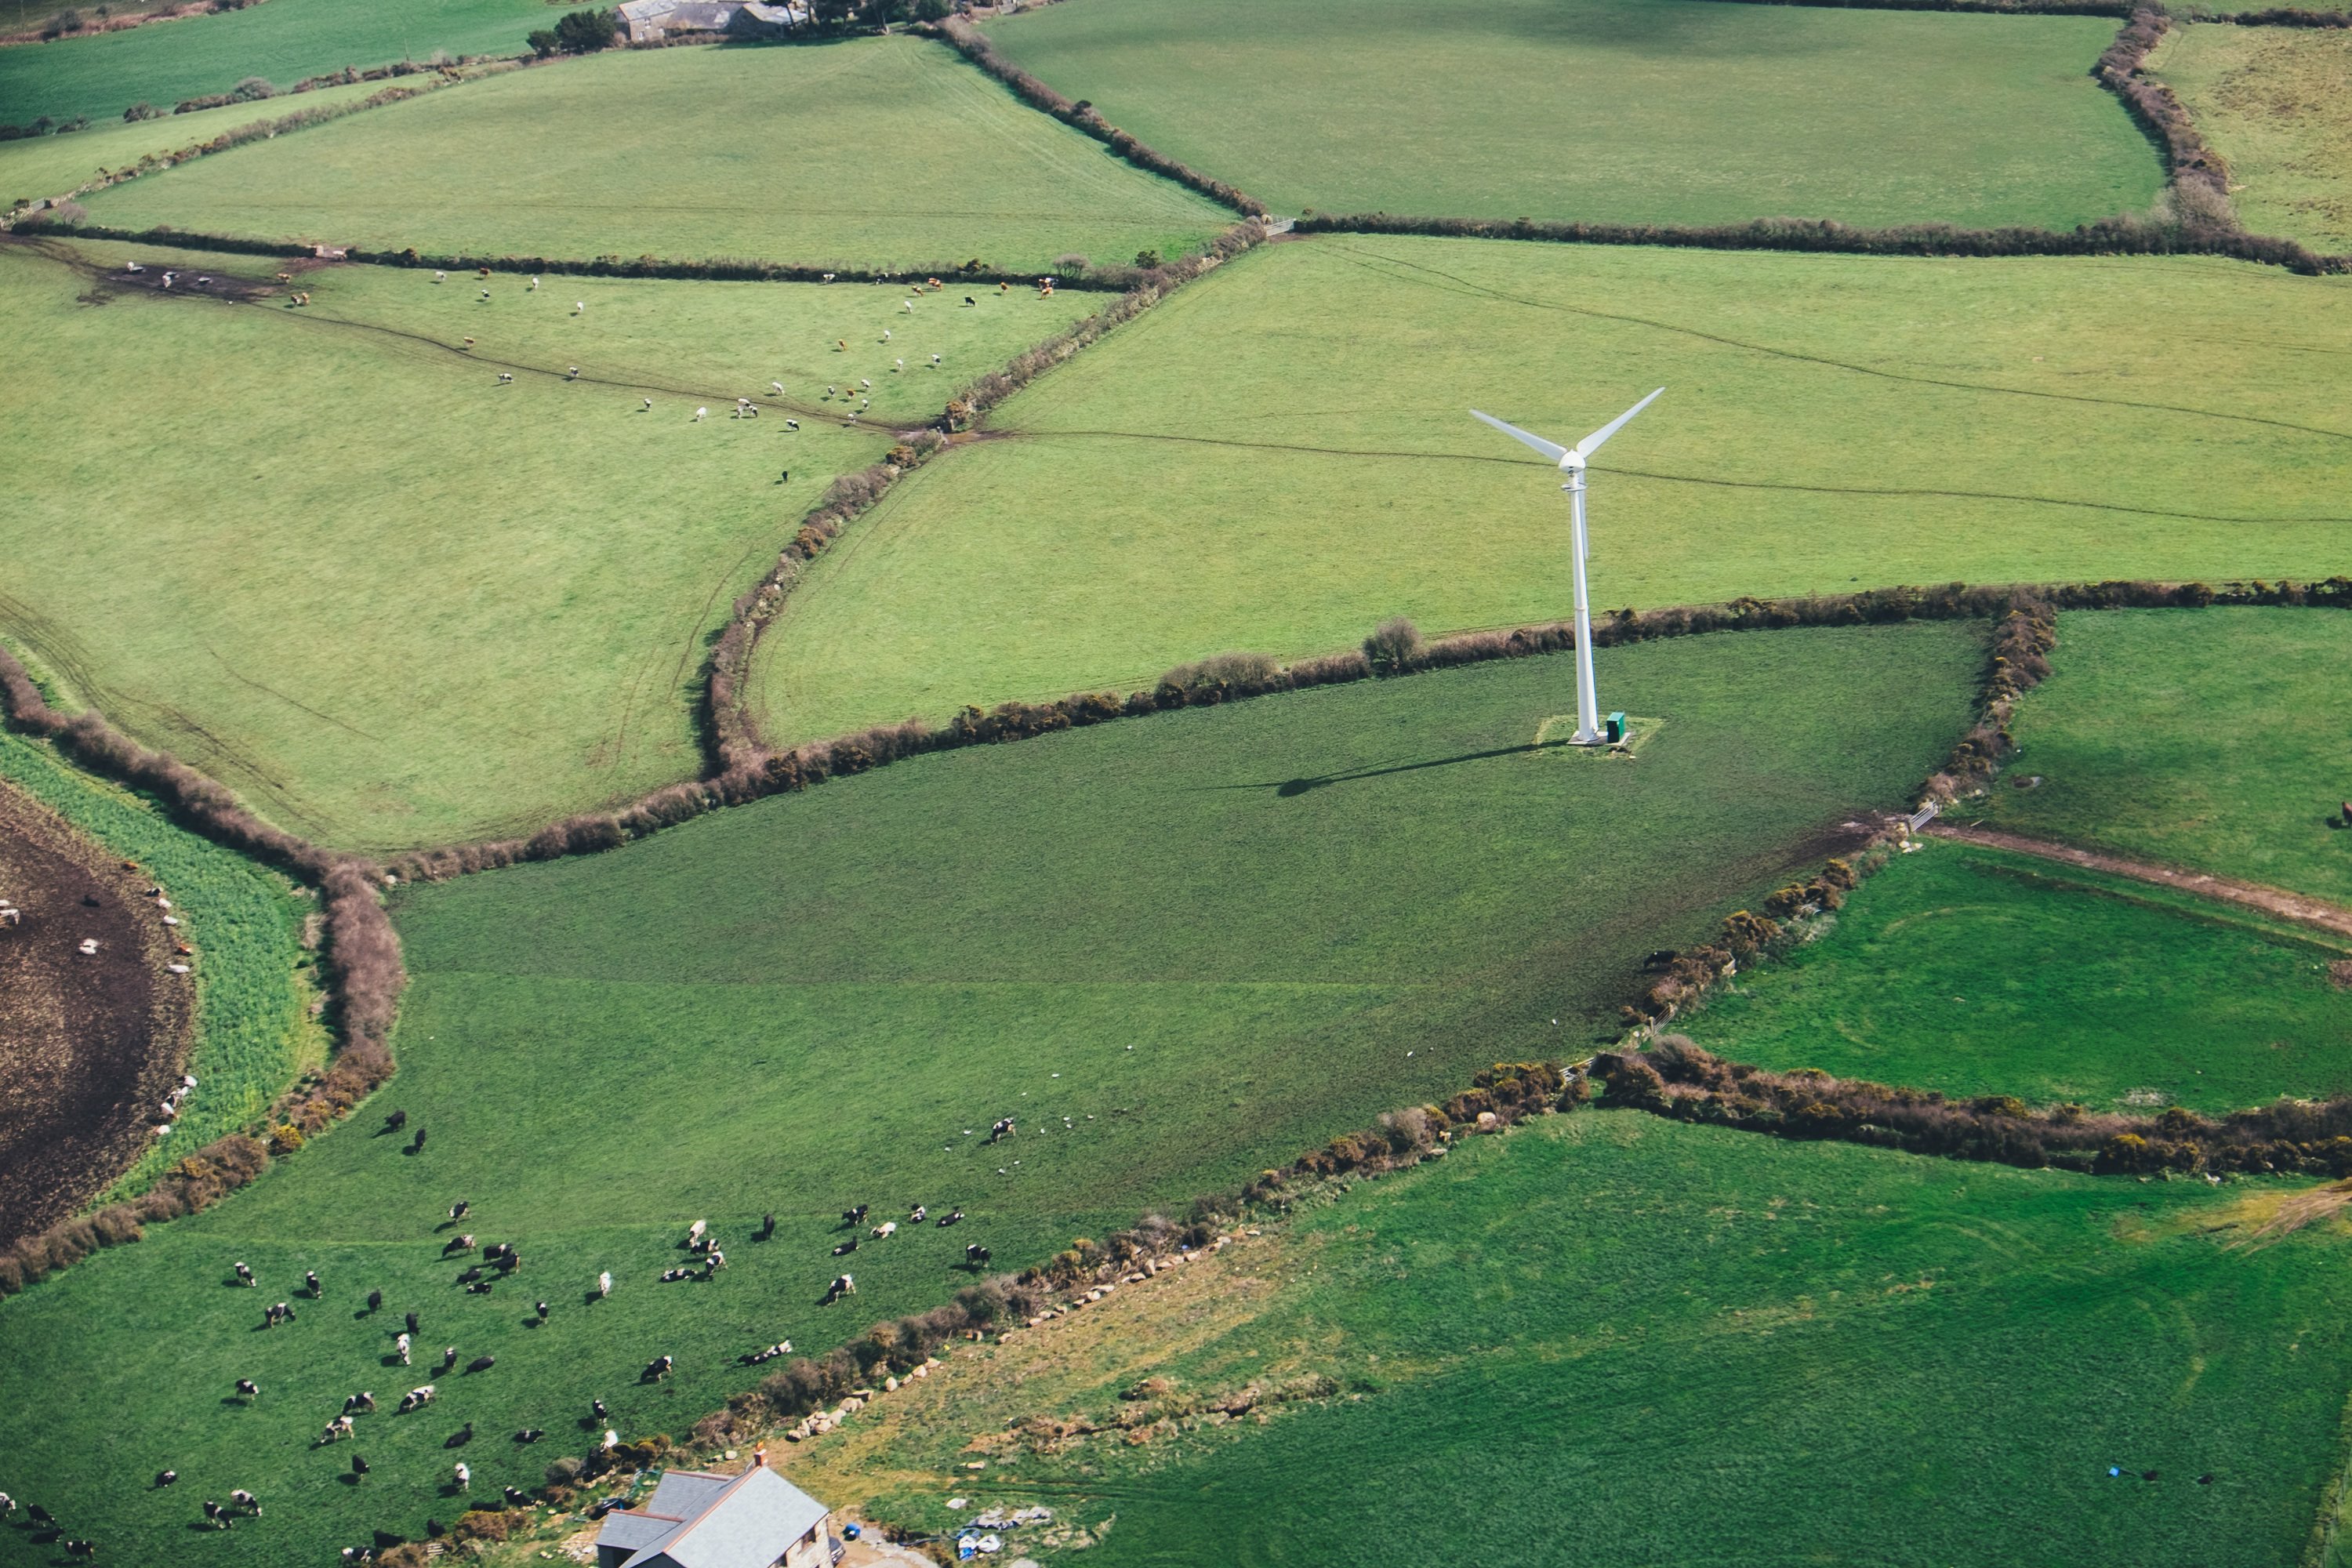 Does your renewable energy meet the good quality criteria?